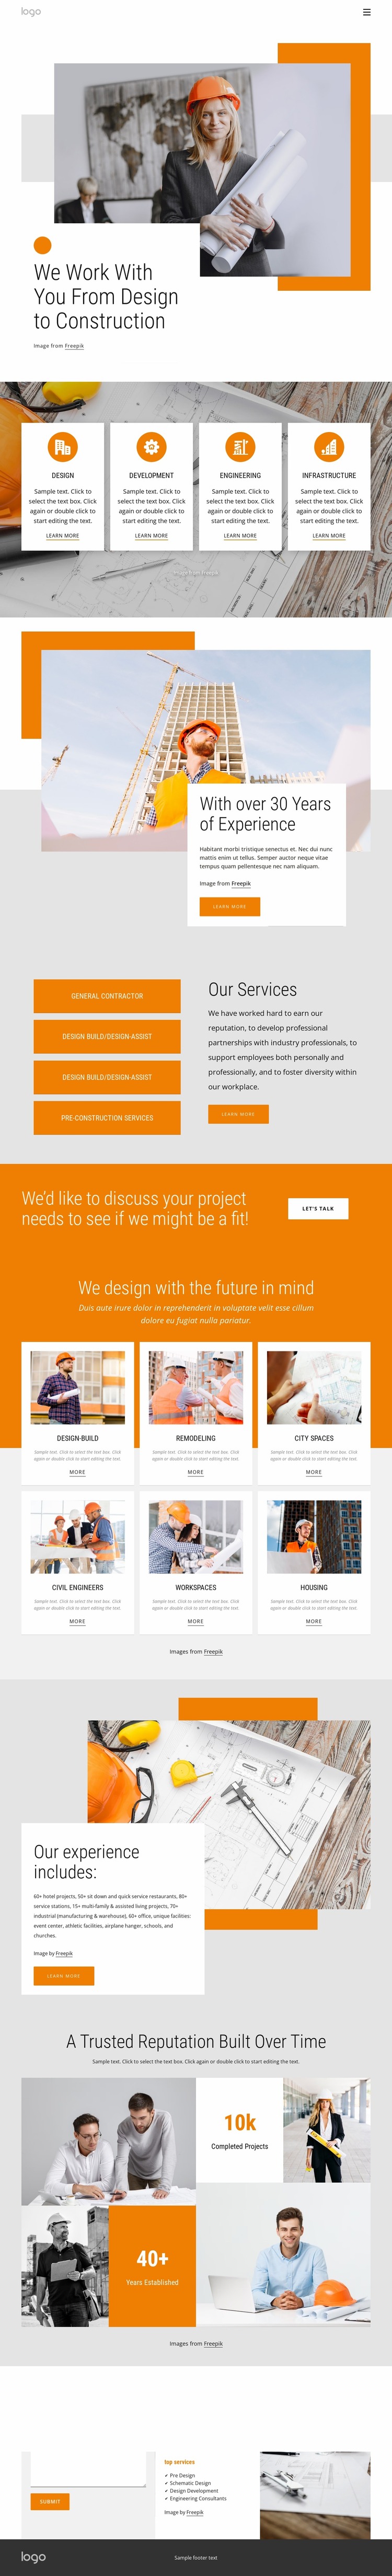 From design to construction Website Mockup